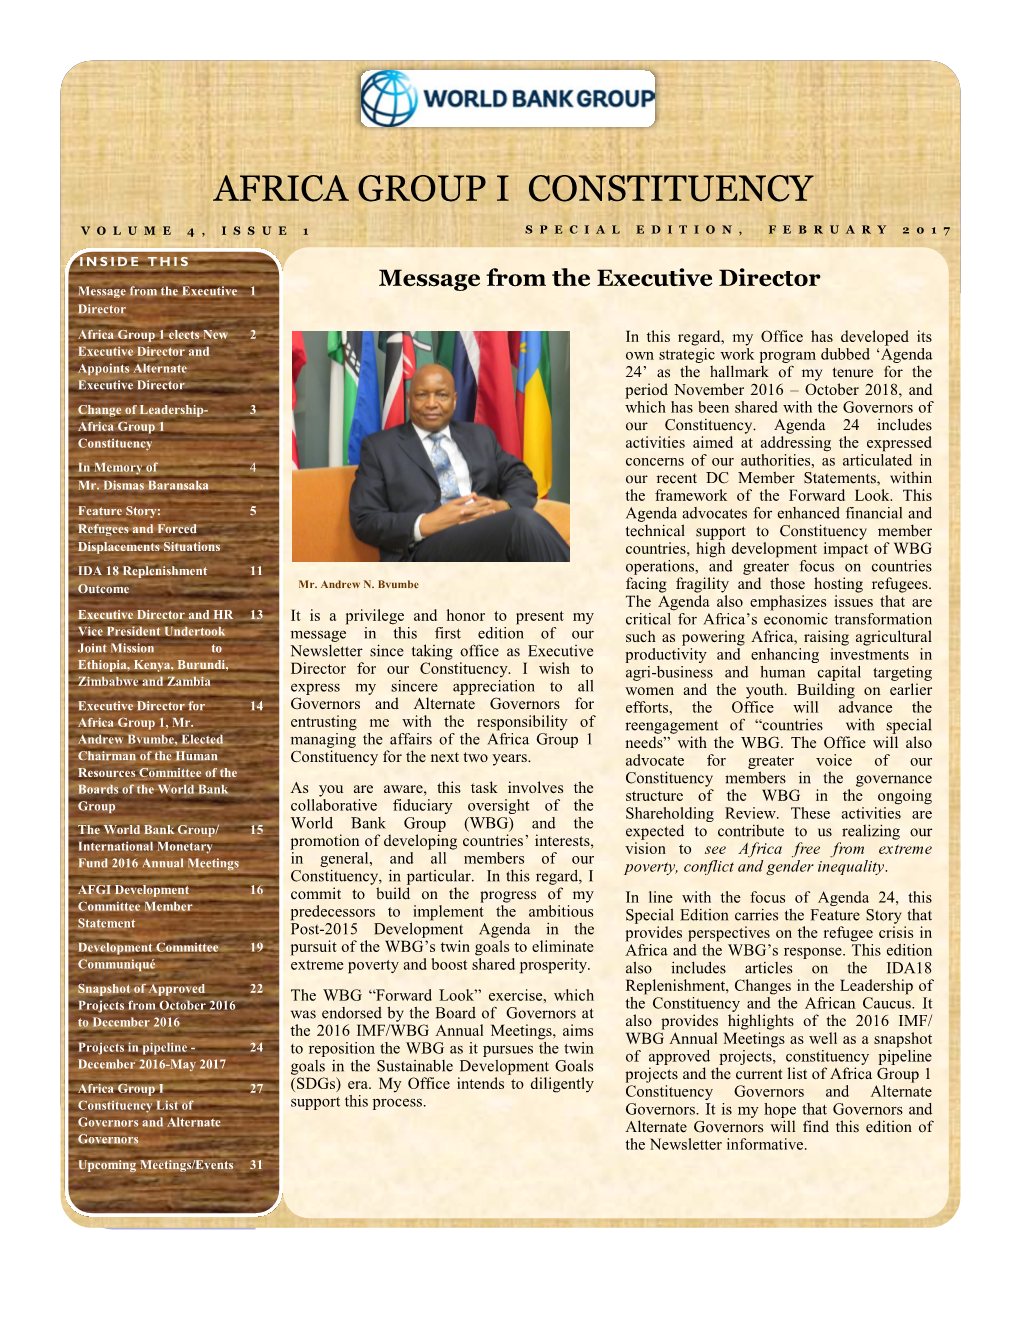 Africa Group I Constituency the World Bank Group